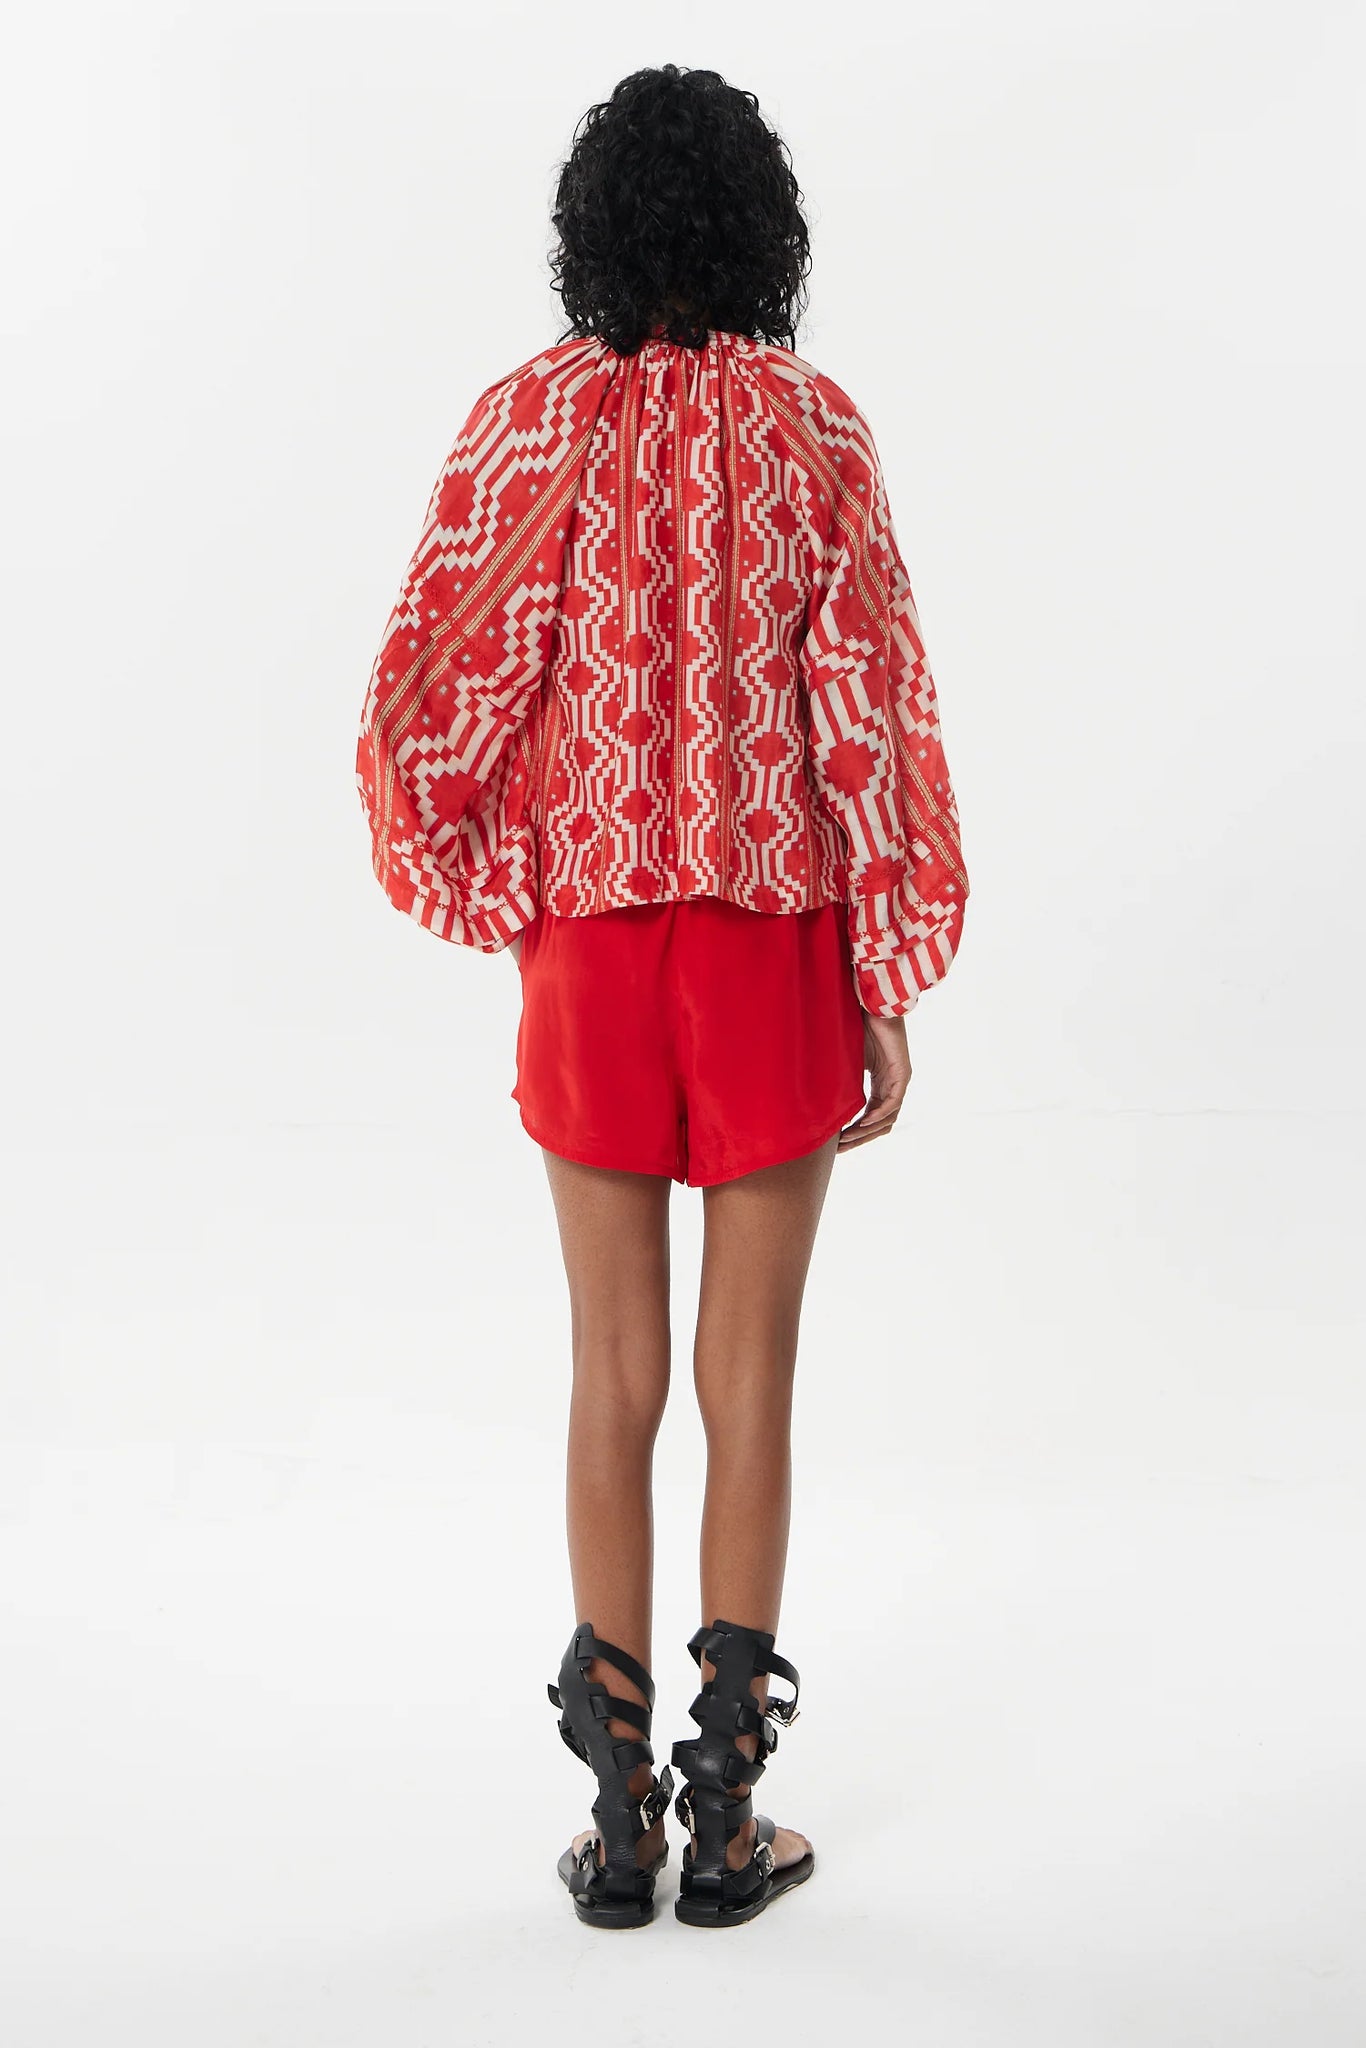 Ayacucho Francis Blouse in Ethnic Red